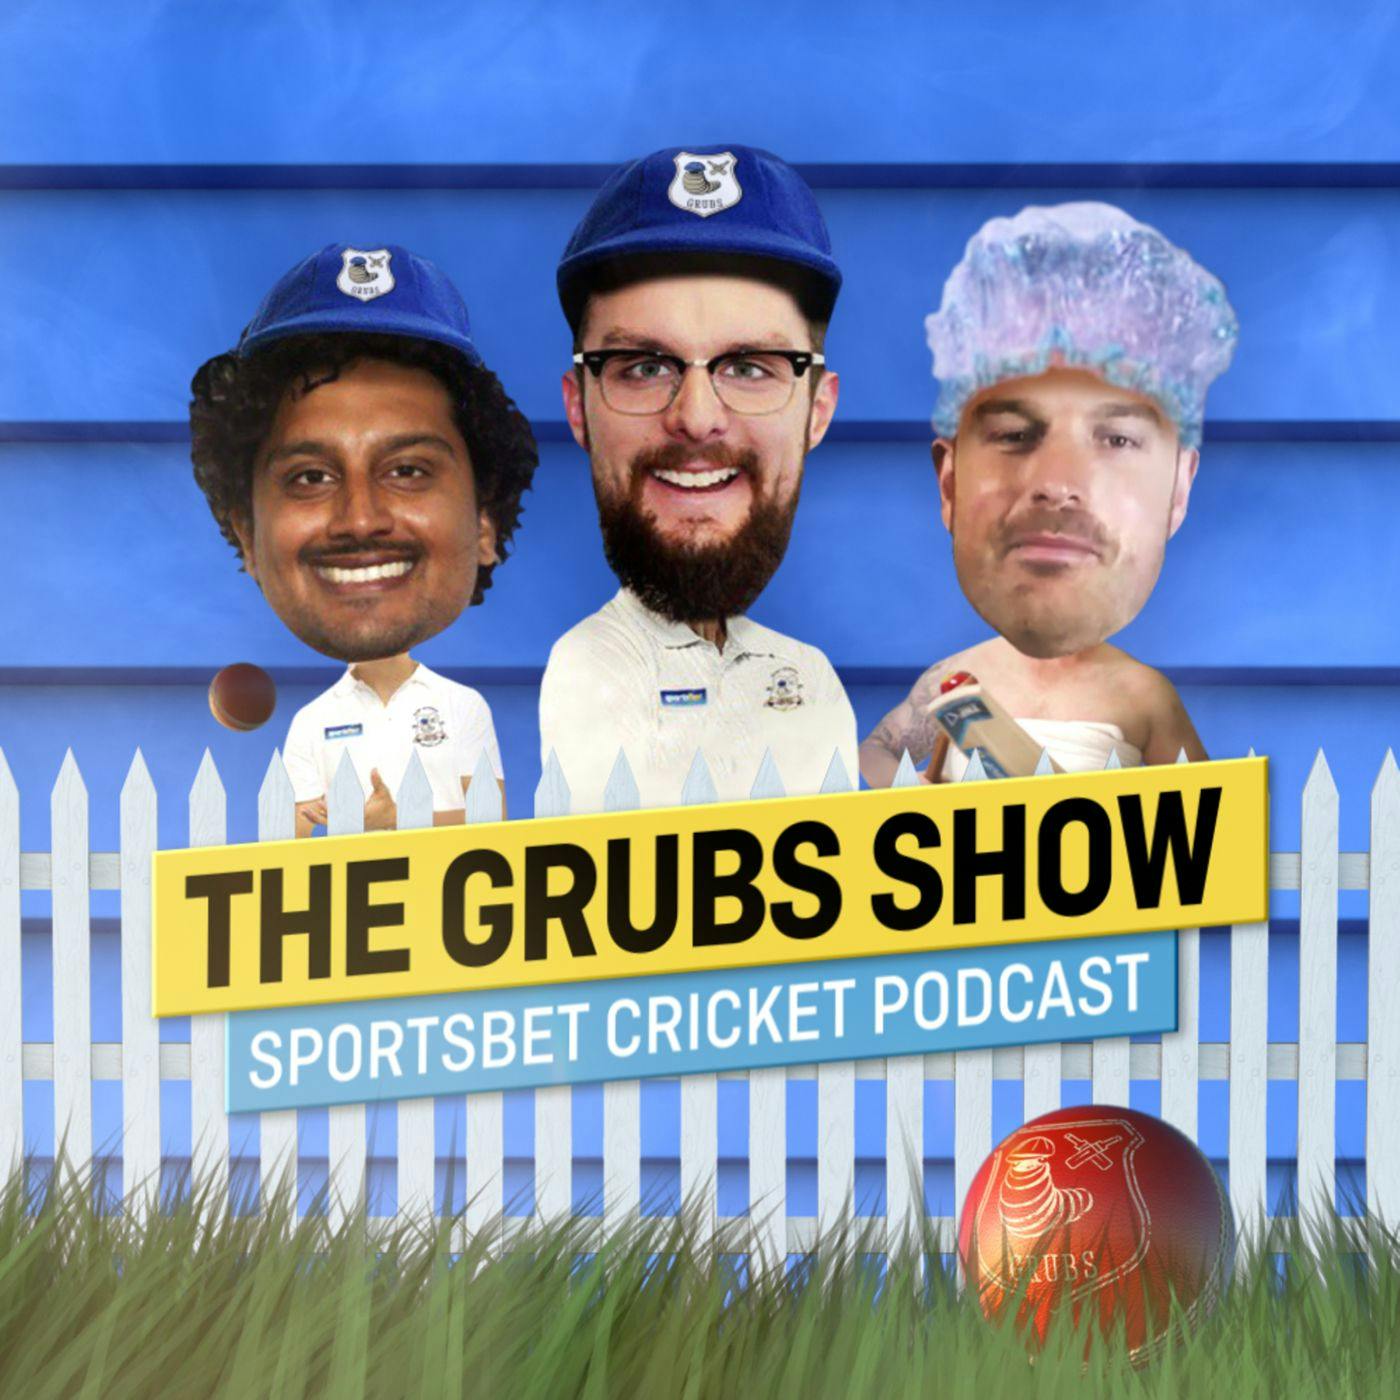 S2 Ep 11 - Grubs on Tour: Lord’s Toffs, Jofra Archer and Charlie Chaplin